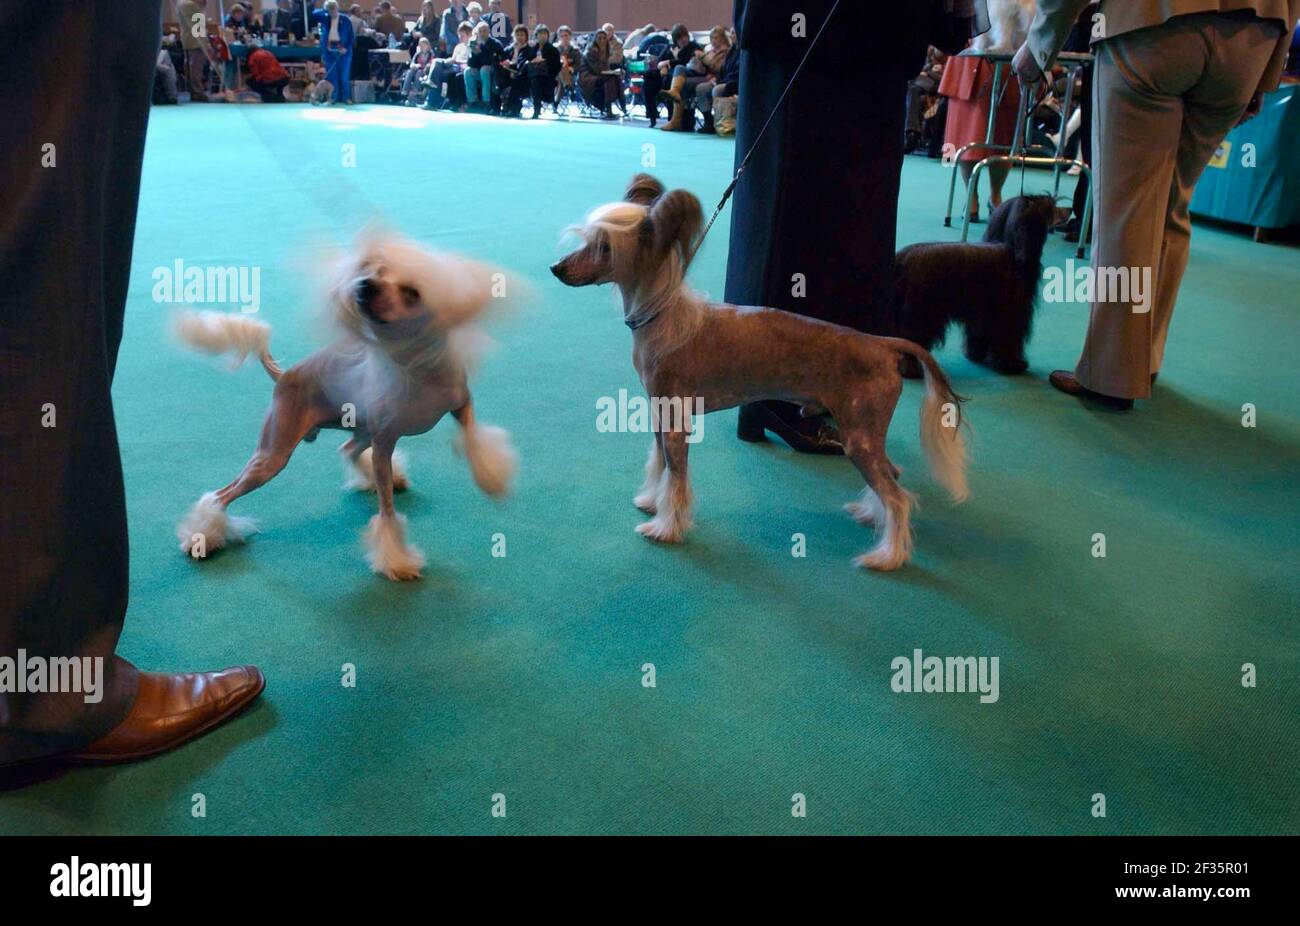 ON DAY 2 OF CRUFTS DOG SHOW AT THE NEC IN BIRMINGHAM.11 March 2005 PILSTON Stock Photo